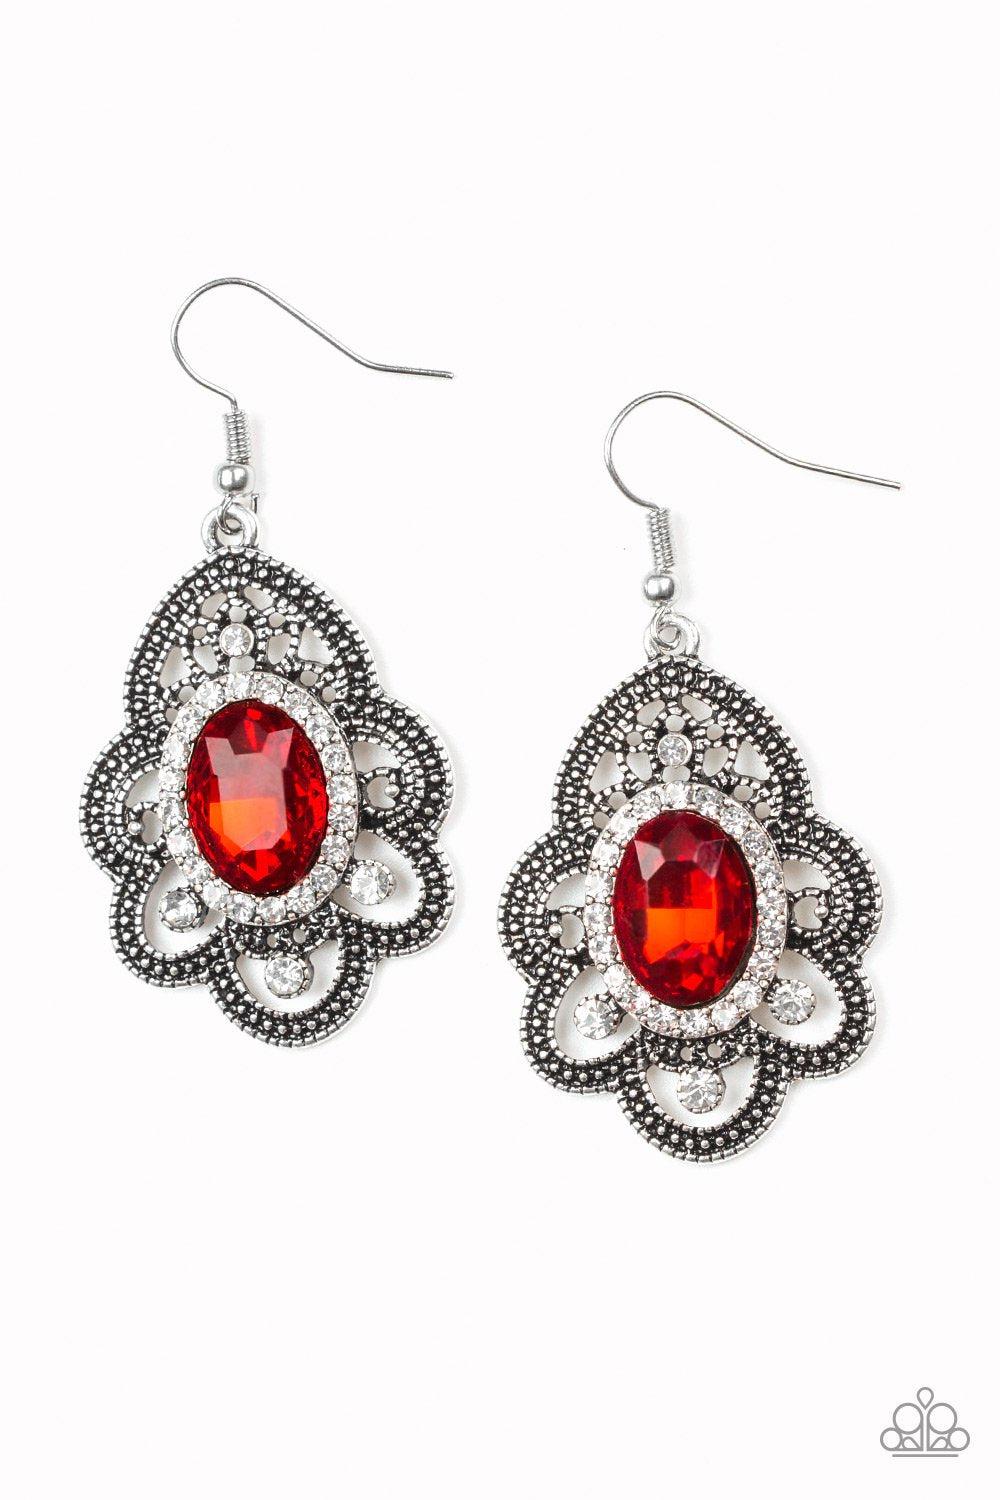 Reign Supreme Red Rhinestone Earrings - Paparazzi Accessories-CarasShop.com - $5 Jewelry by Cara Jewels